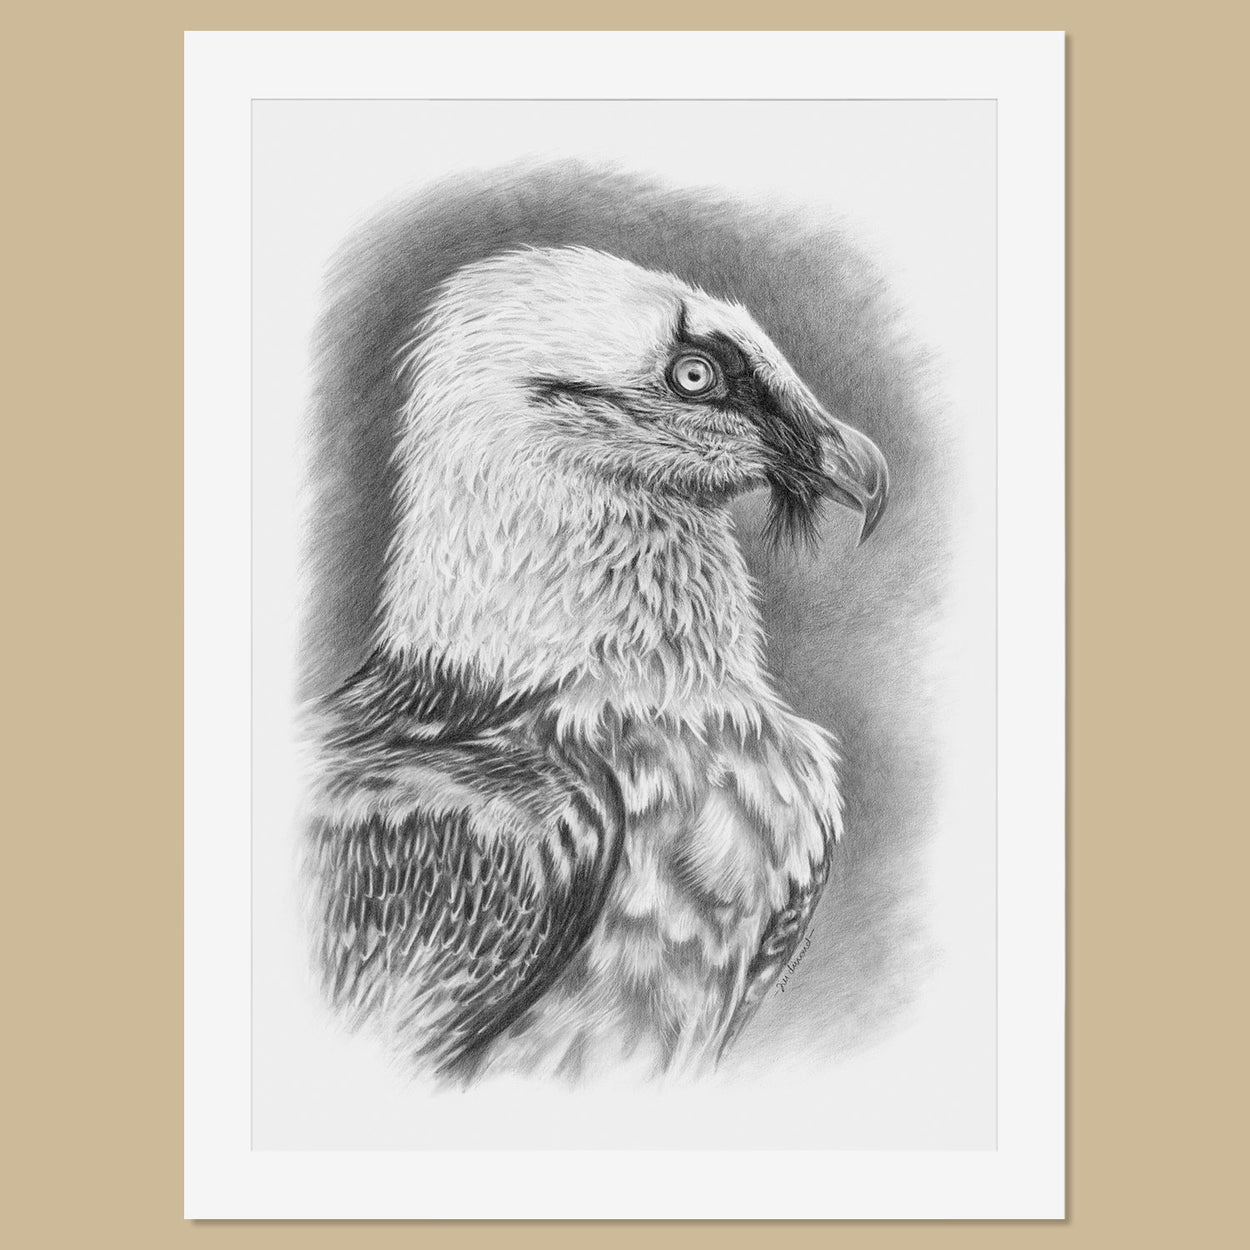 Original Bearded Vulture Pencil Drawing - The Thriving Wild - Jill Dimond